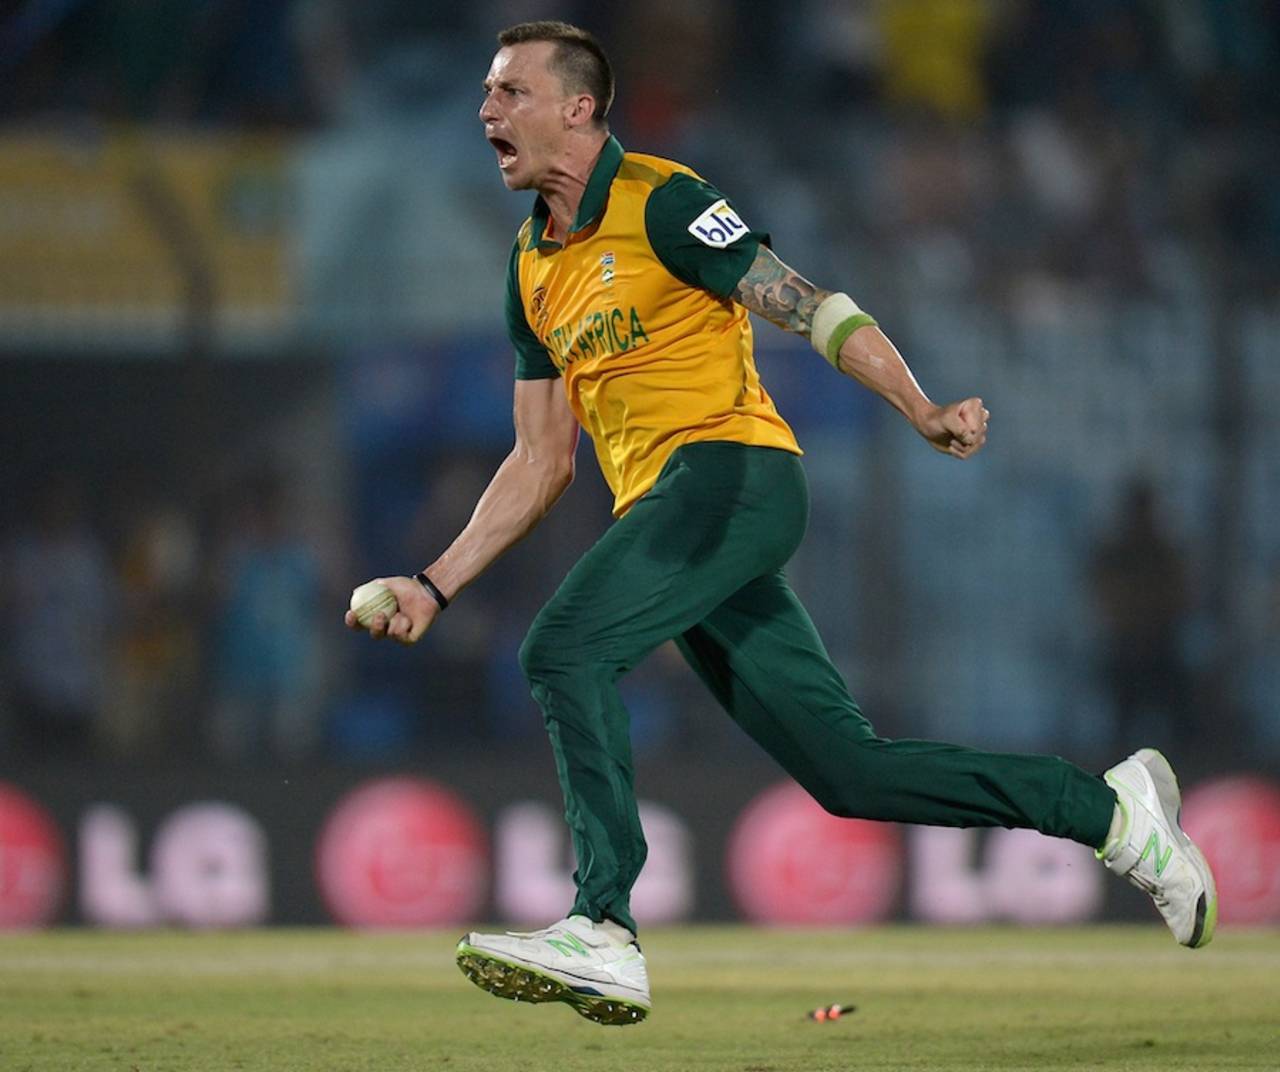 Dale Steyn goes berserk after a sensational victory, New Zealand v South Africa, World T20, Group 1, Chittagong, March 24, 2014